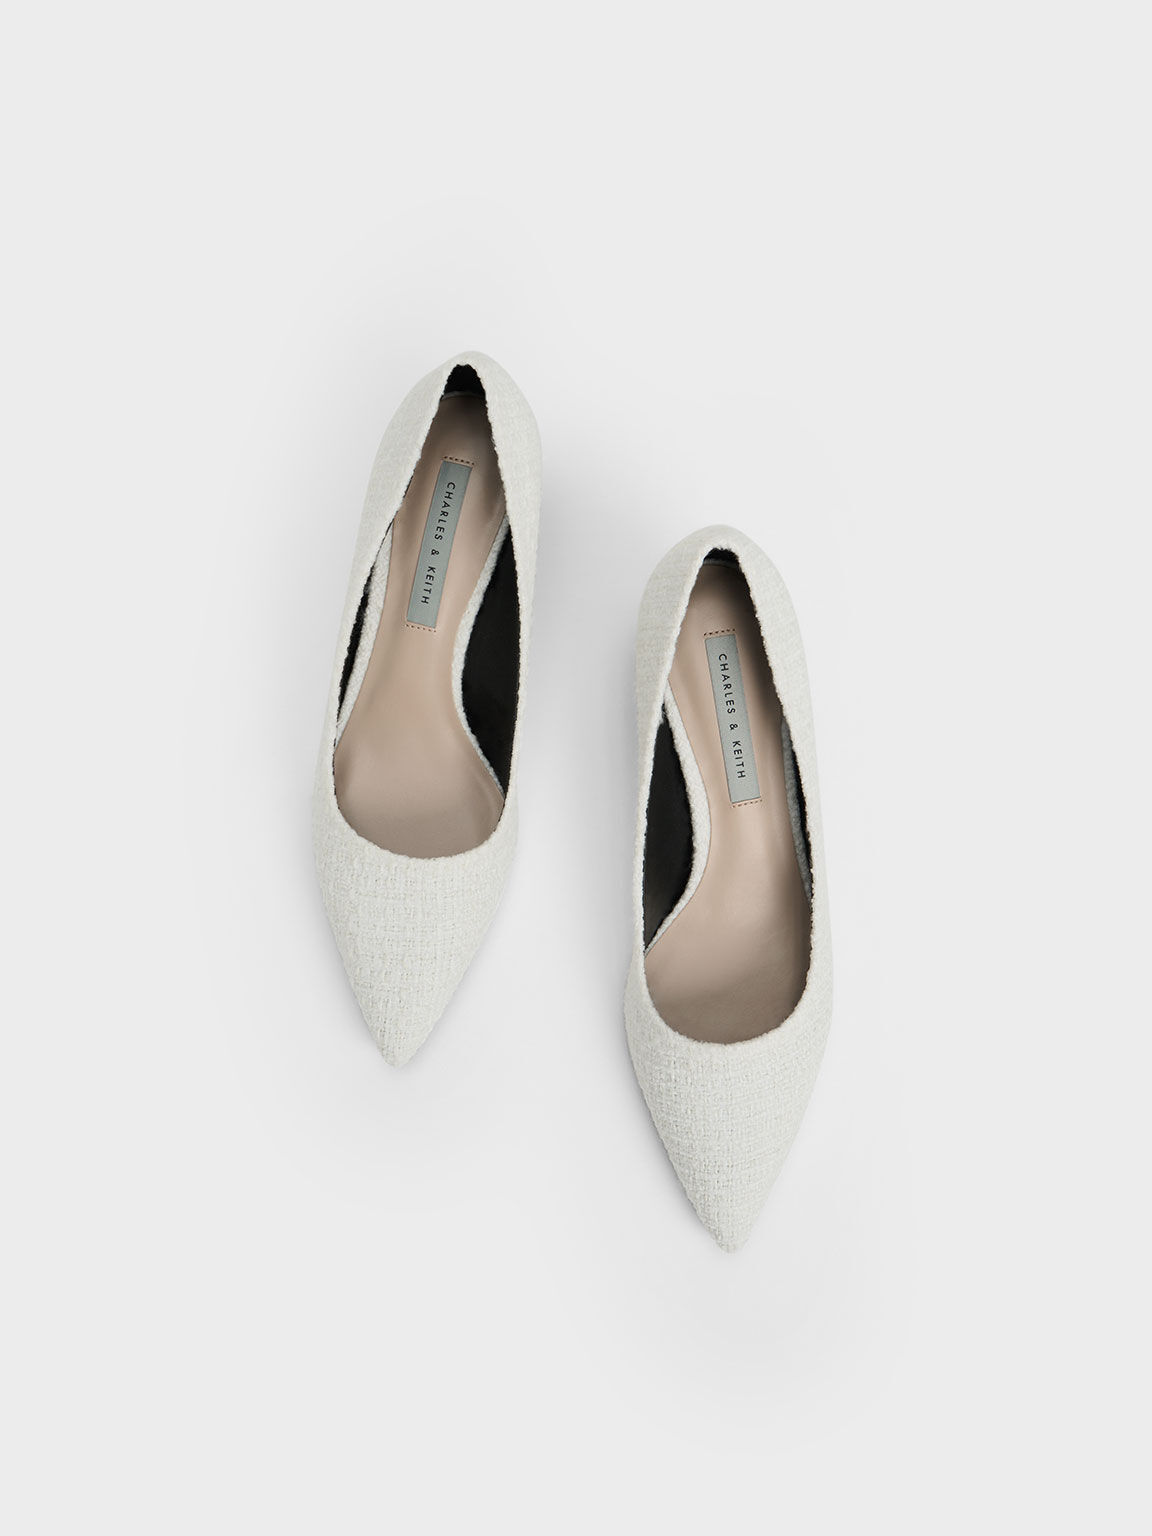 Chalk Printed Fabric Bow Leather Mules | CHARLES & KEITH | Charles and keith  shoes, Shoes heels classy, Fabric bows